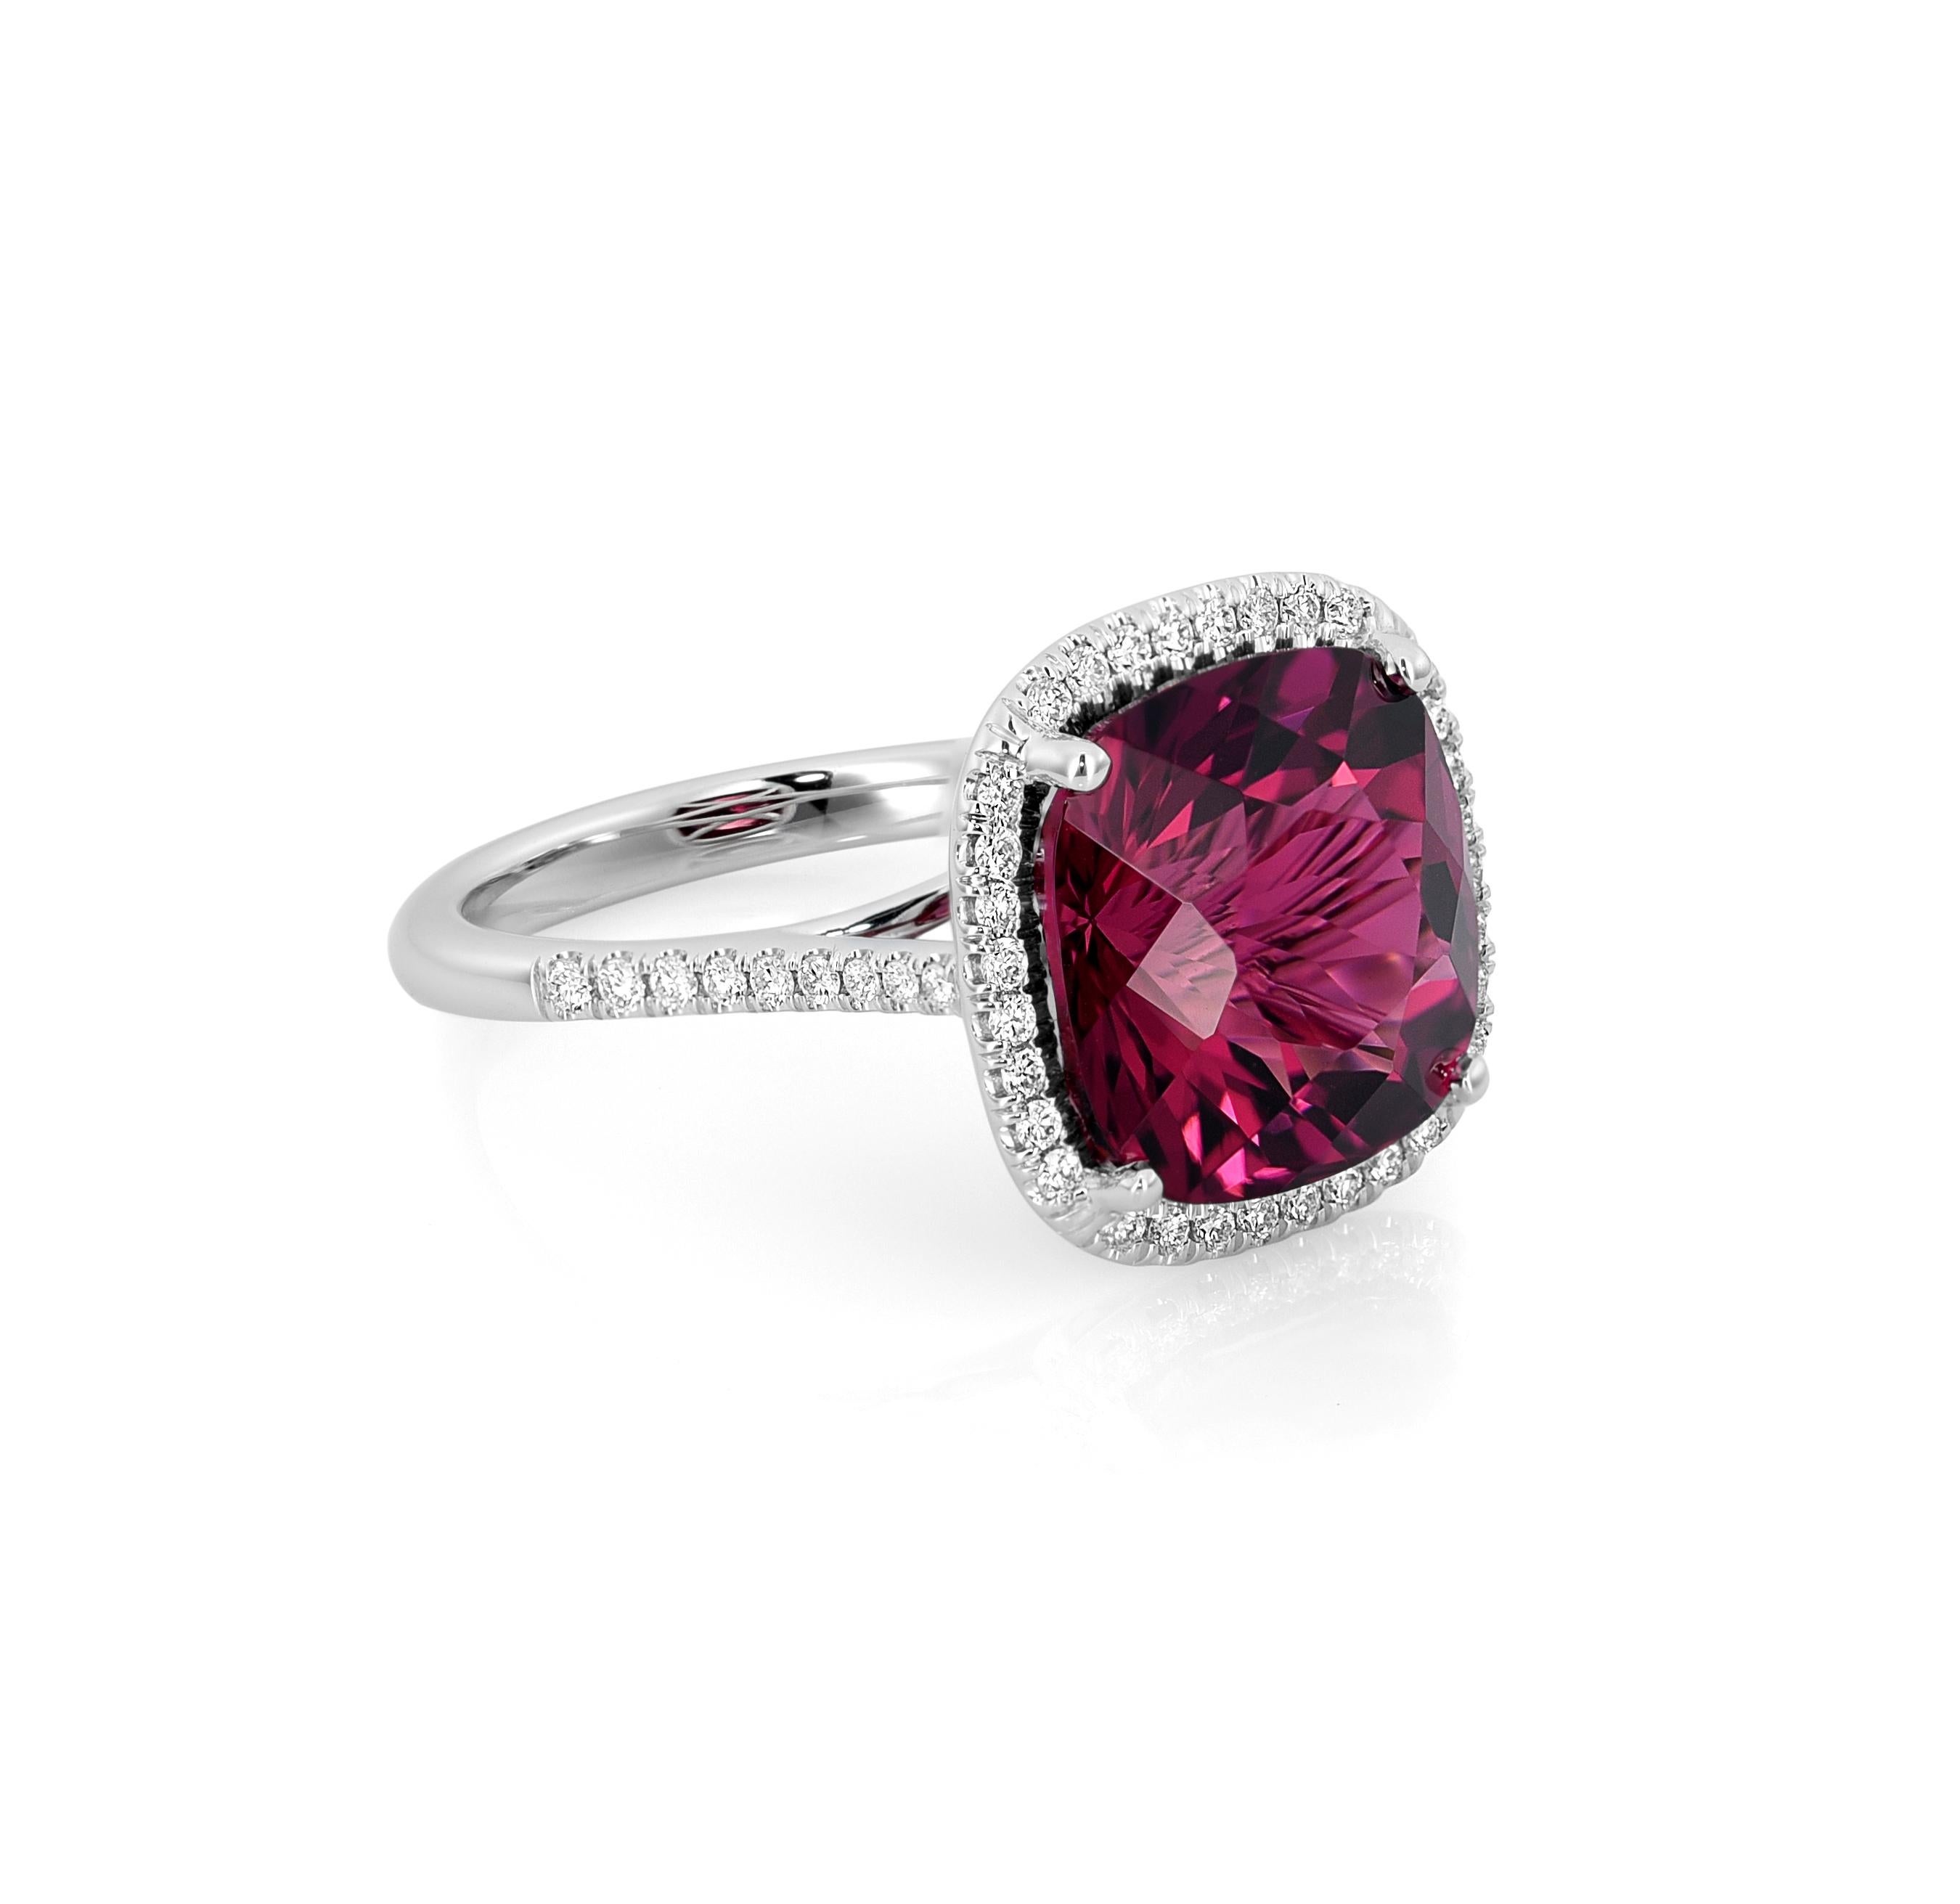 The jewelry piece features a stunning cushion-shaped Natural Red Tourmaline gemstone, measuring 12 x 12.10 x 8.77 mm and weighing 7.78 carats. It is elegantly set in 14K White Gold. The intricate design includes 0.31 carats of dazzling diamonds as